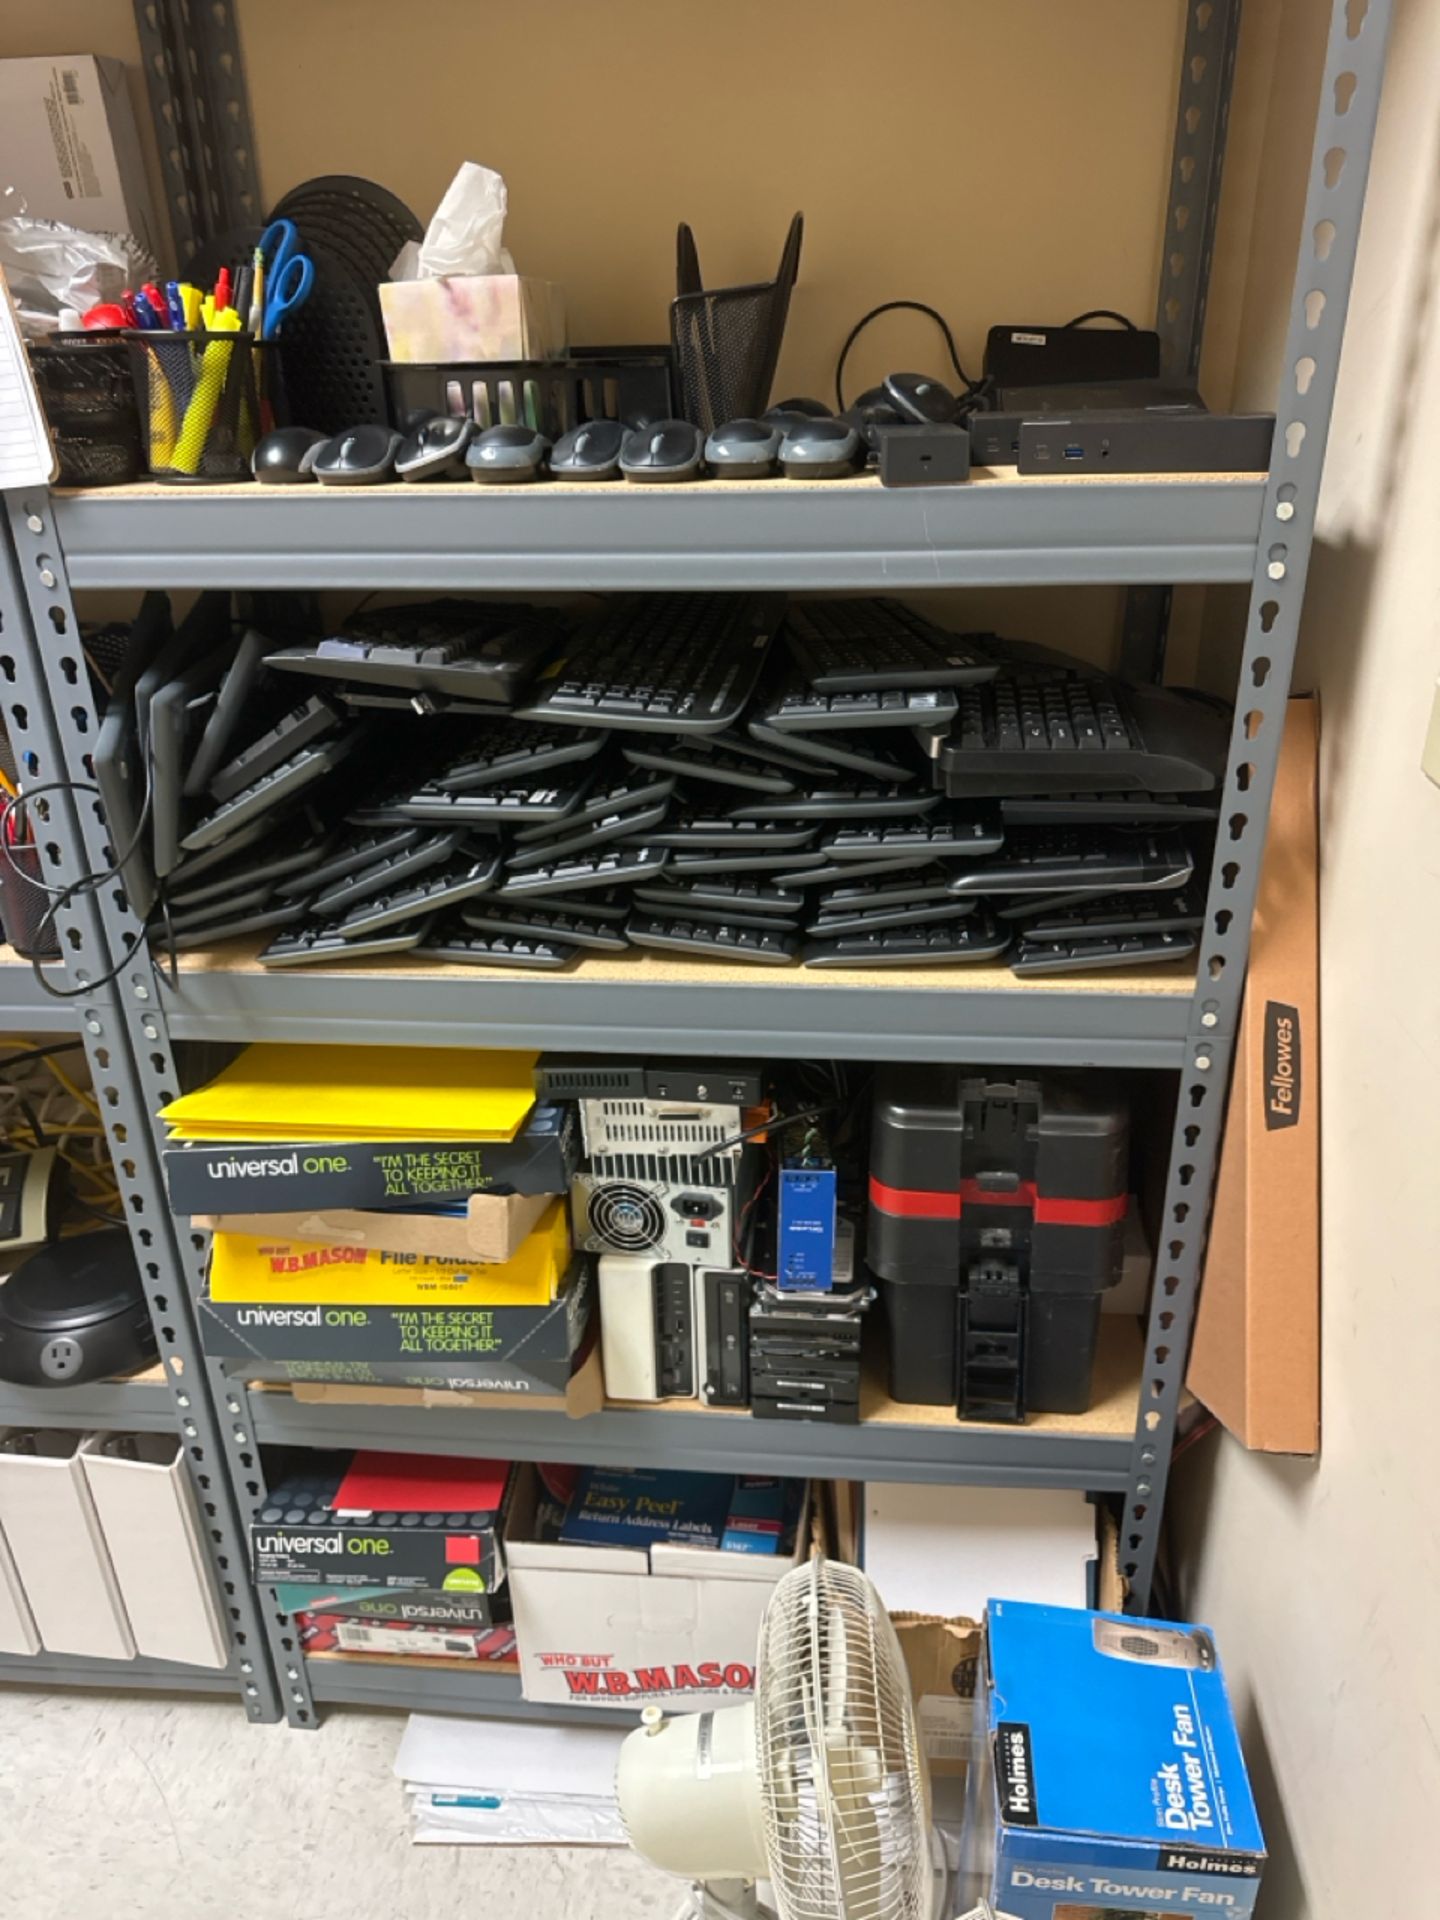 Contents Of Storage Room - Image 2 of 19